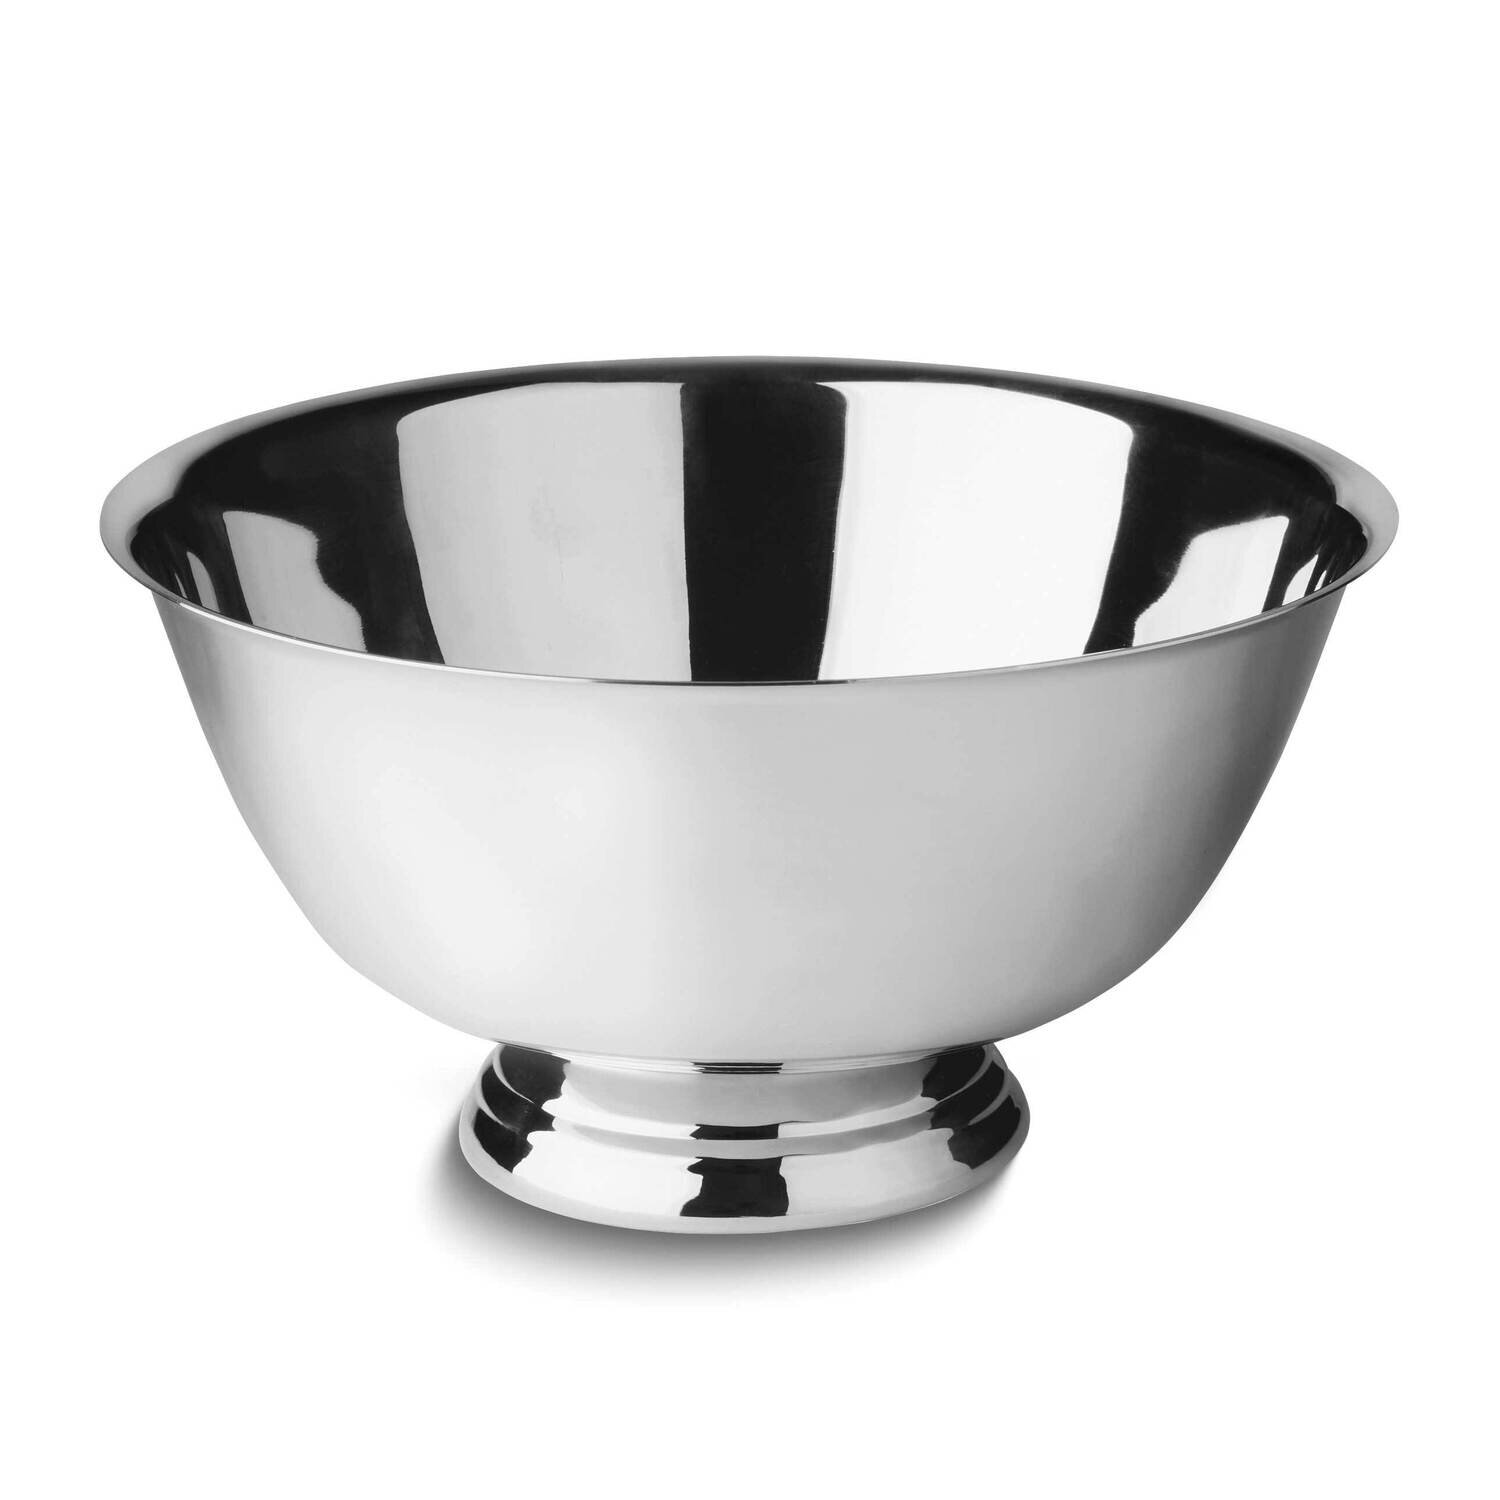 Elengance Stainless Steel Revere 8 Inch Dia Bowl GM25106